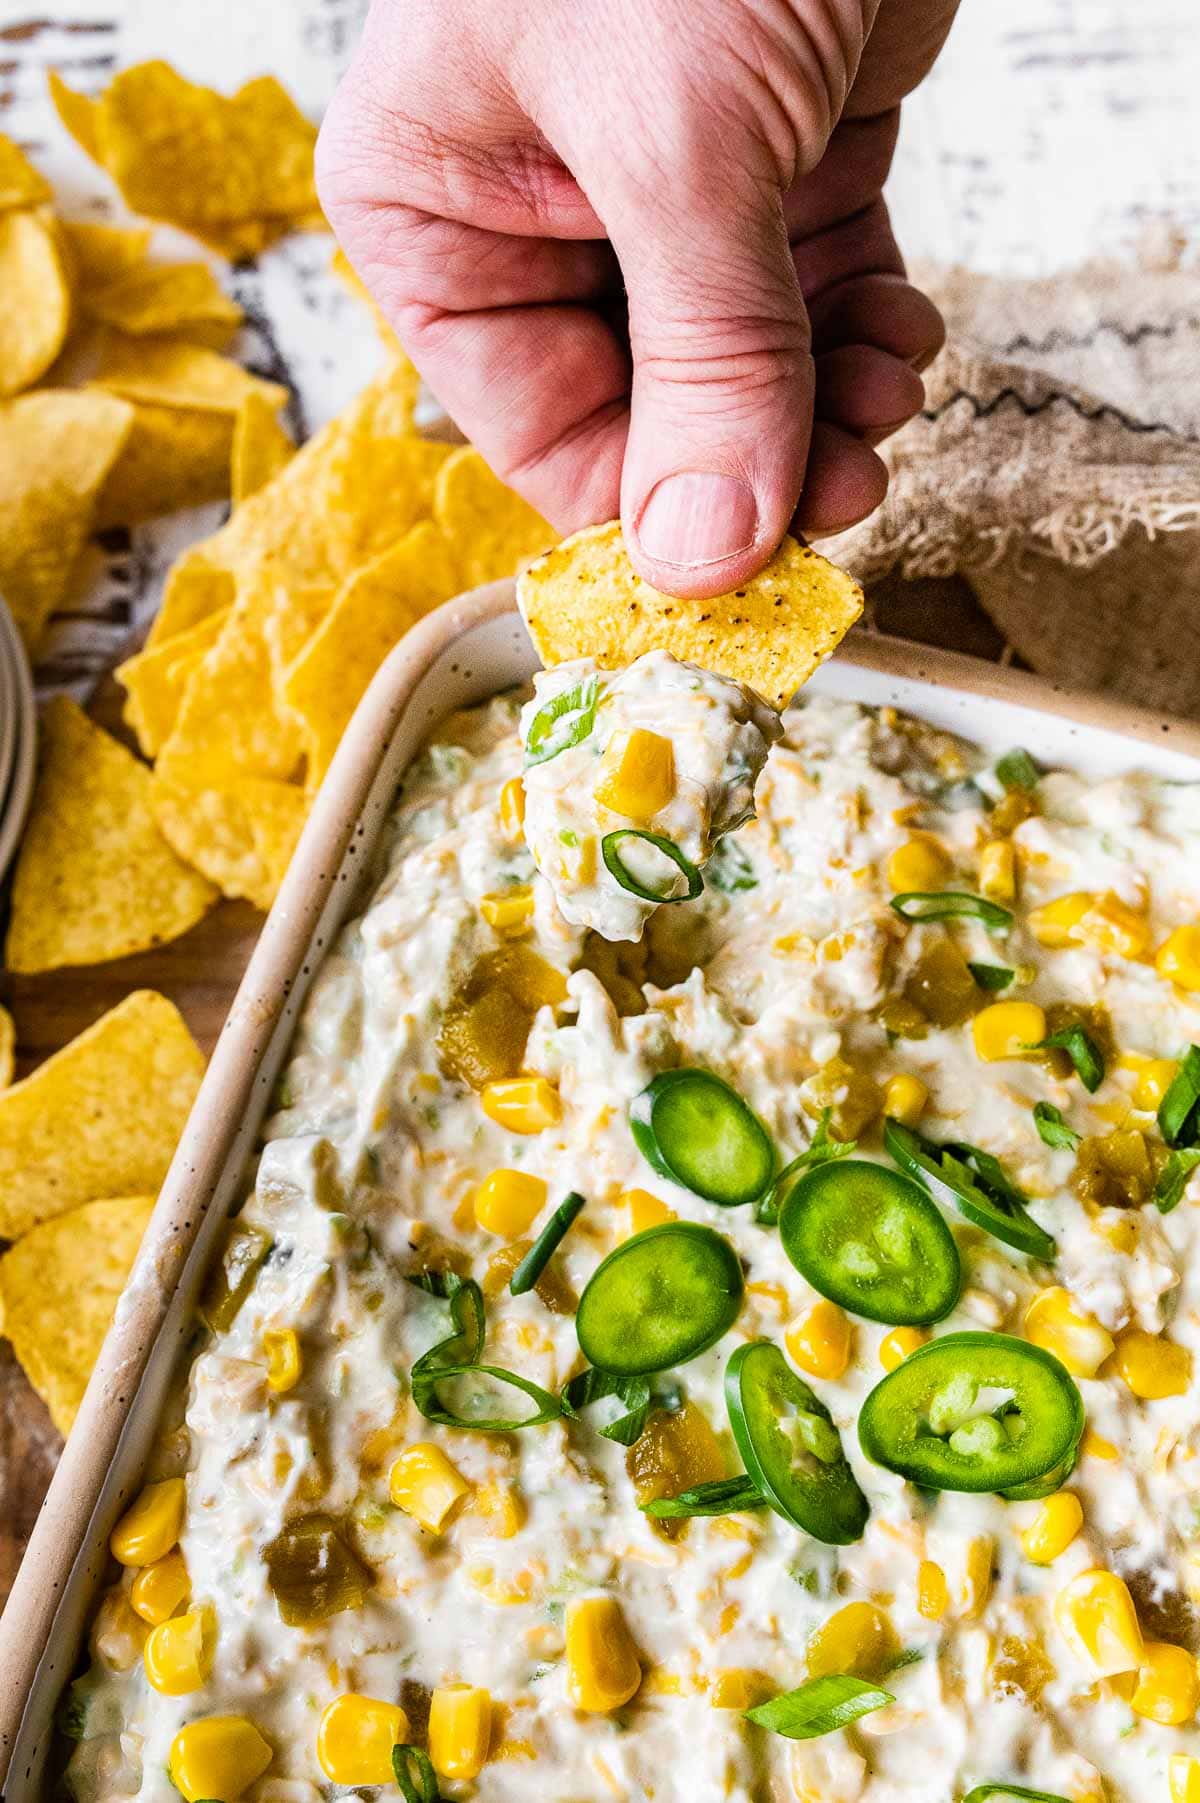 Corn Dip finished dip in serving dish garnished with sliced jalapeno and holding chip with dip on it.